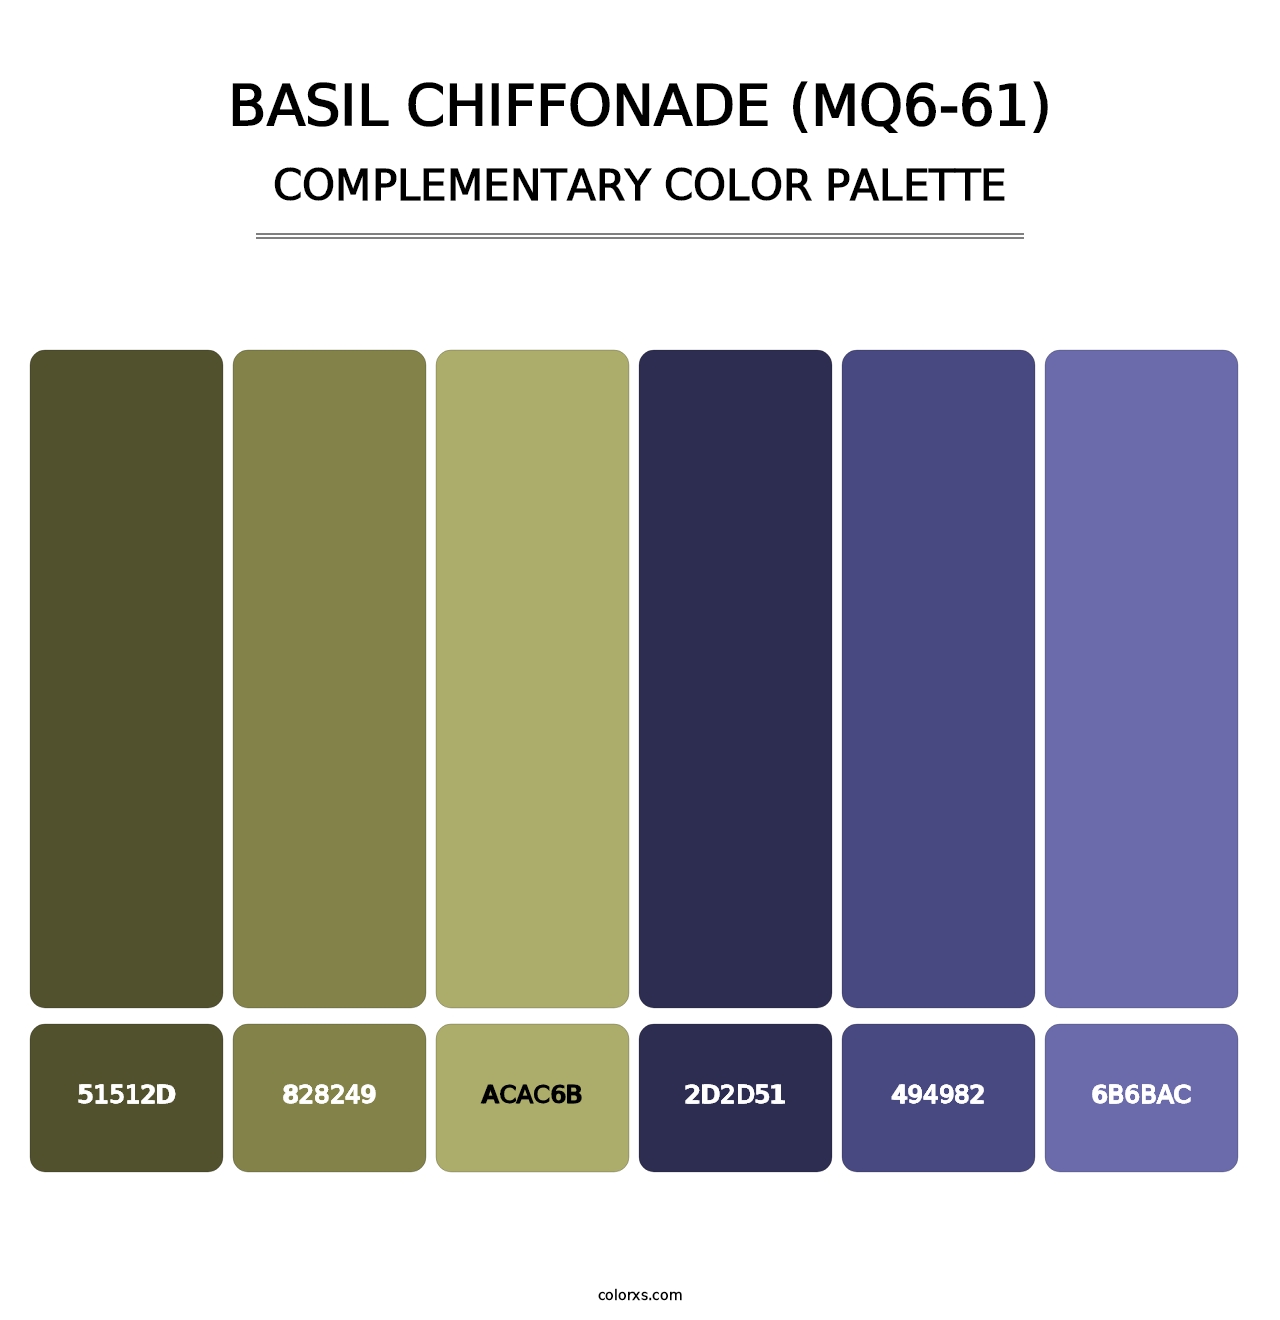 Basil Chiffonade (MQ6-61) - Complementary Color Palette